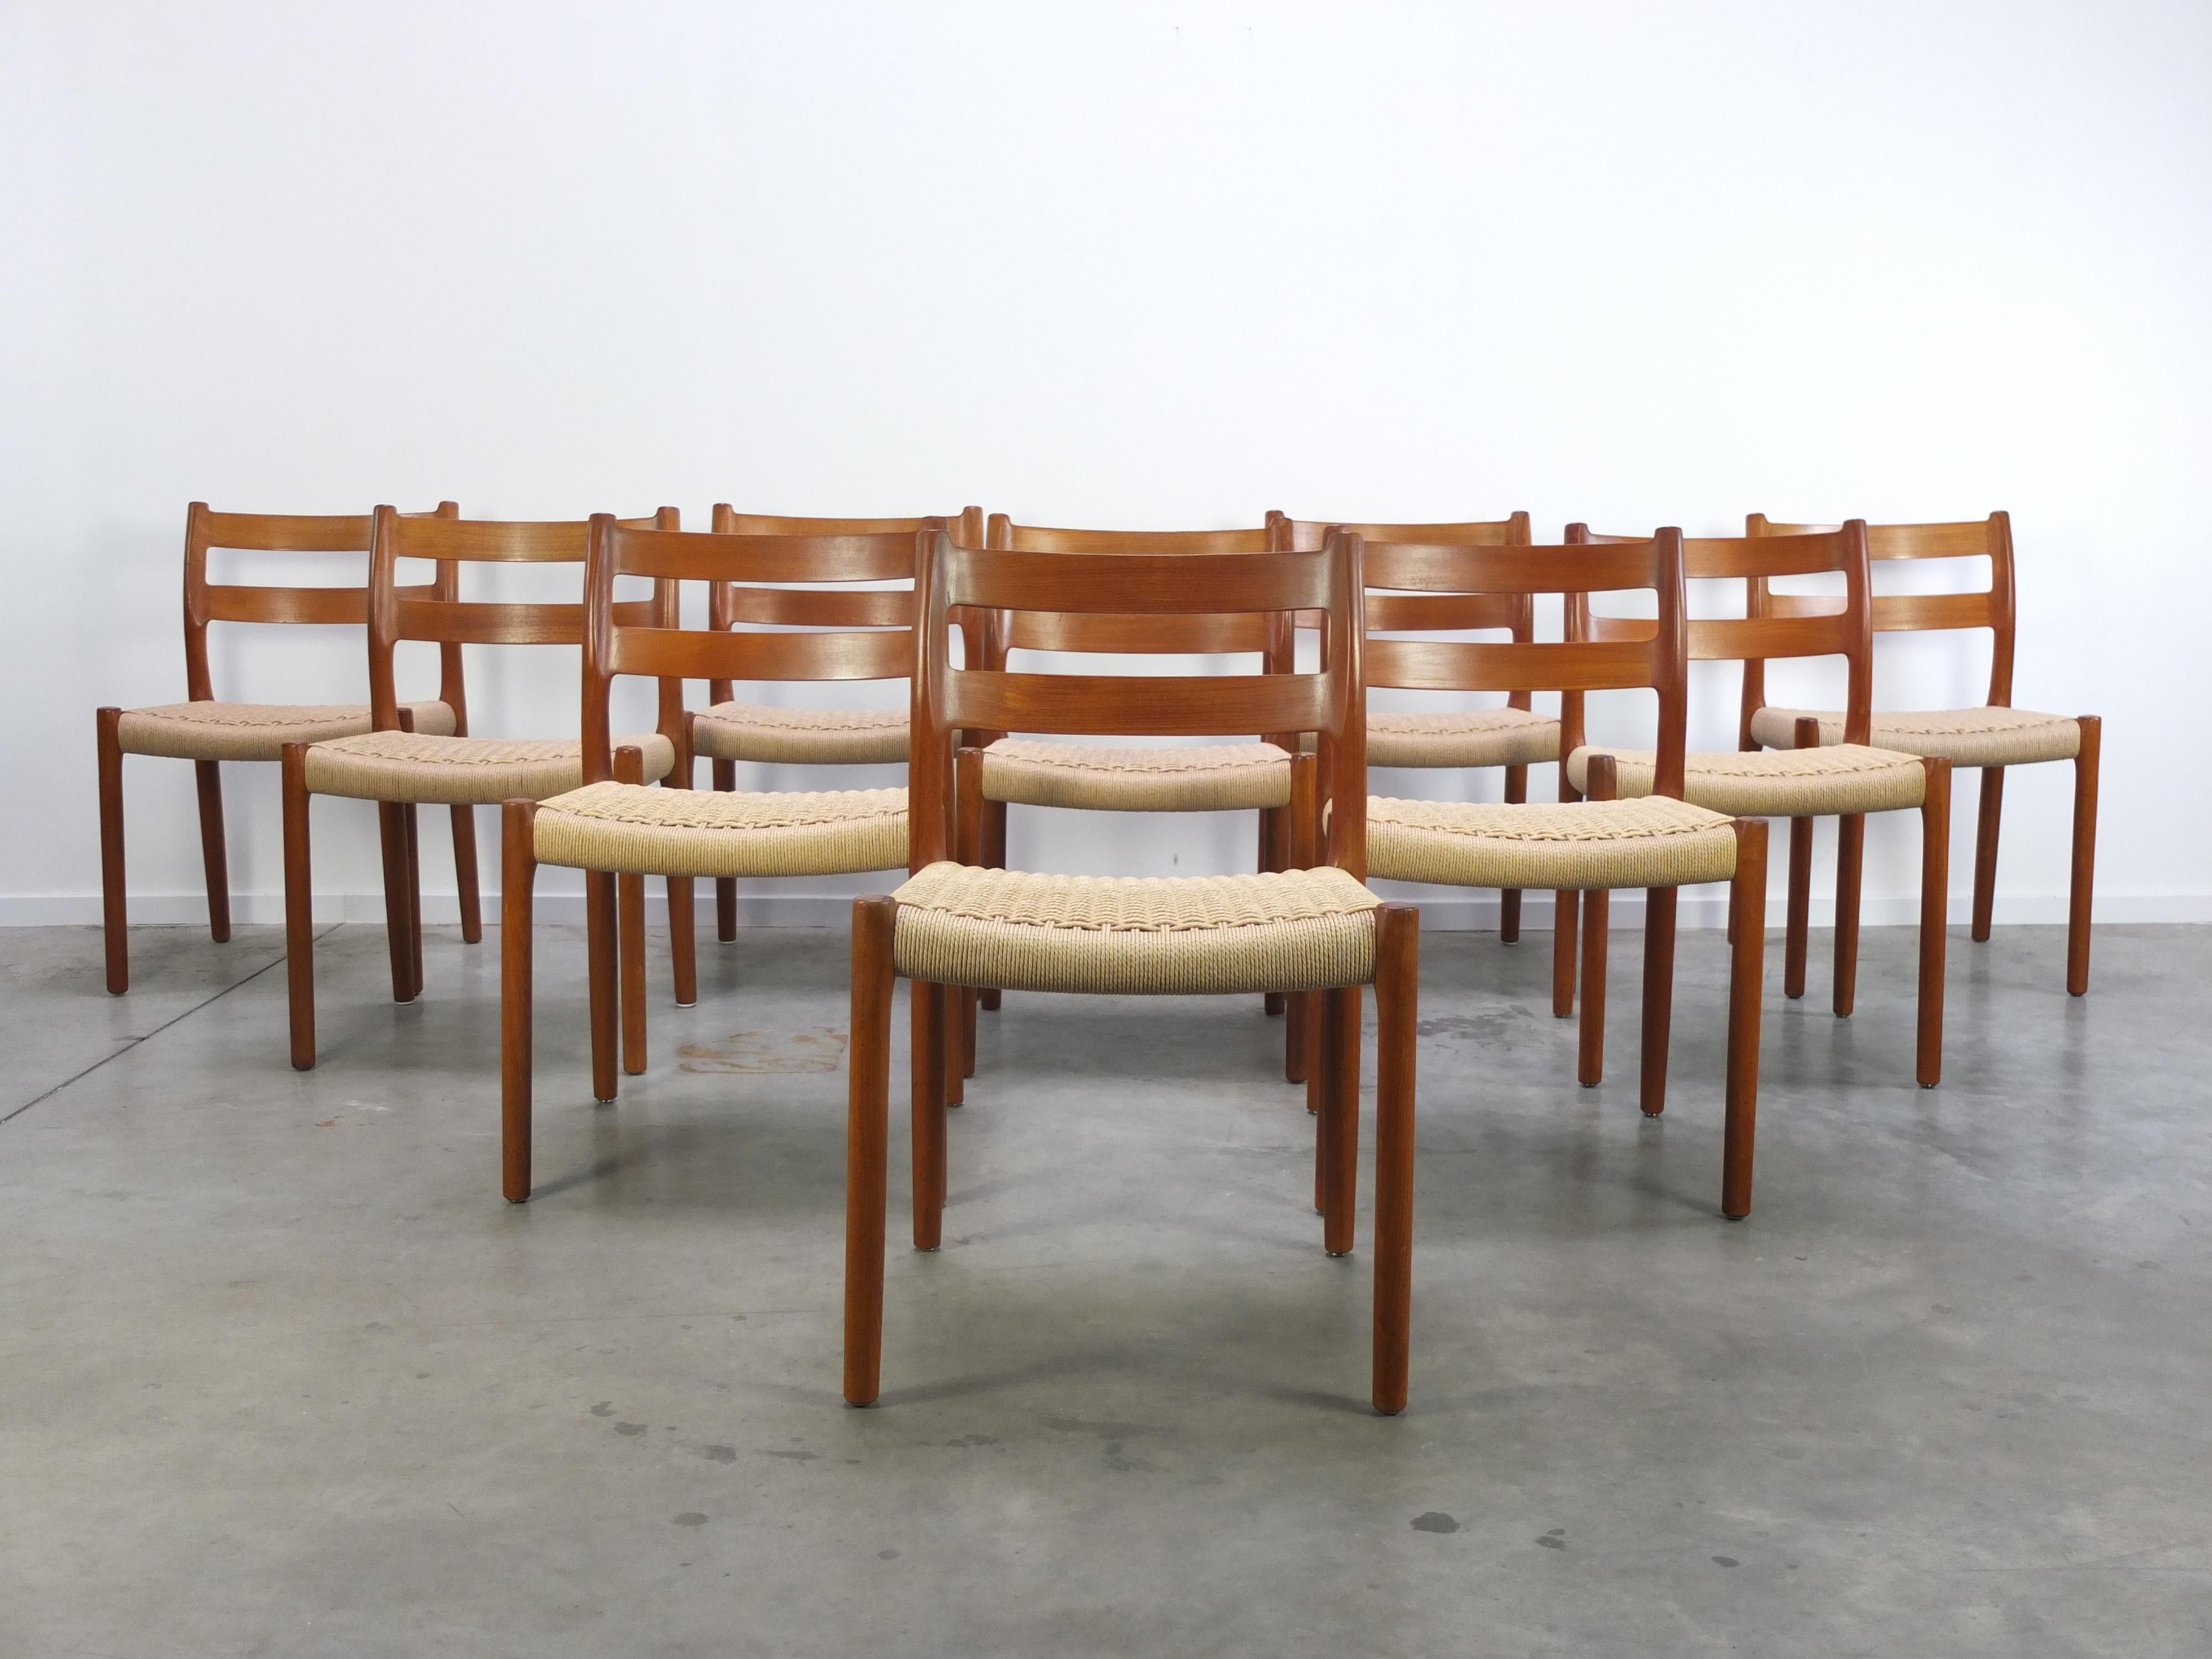 Set of 10 (!) ‘Model 84’ dining chairs designed by Niels O. Møller in the 1960s. These chairs are made of a beautiful solid teak wood frame with fully renewed papercord seatings. Produced by J.L. Møllers Møbelfabrik in Denmark. In perfect restored